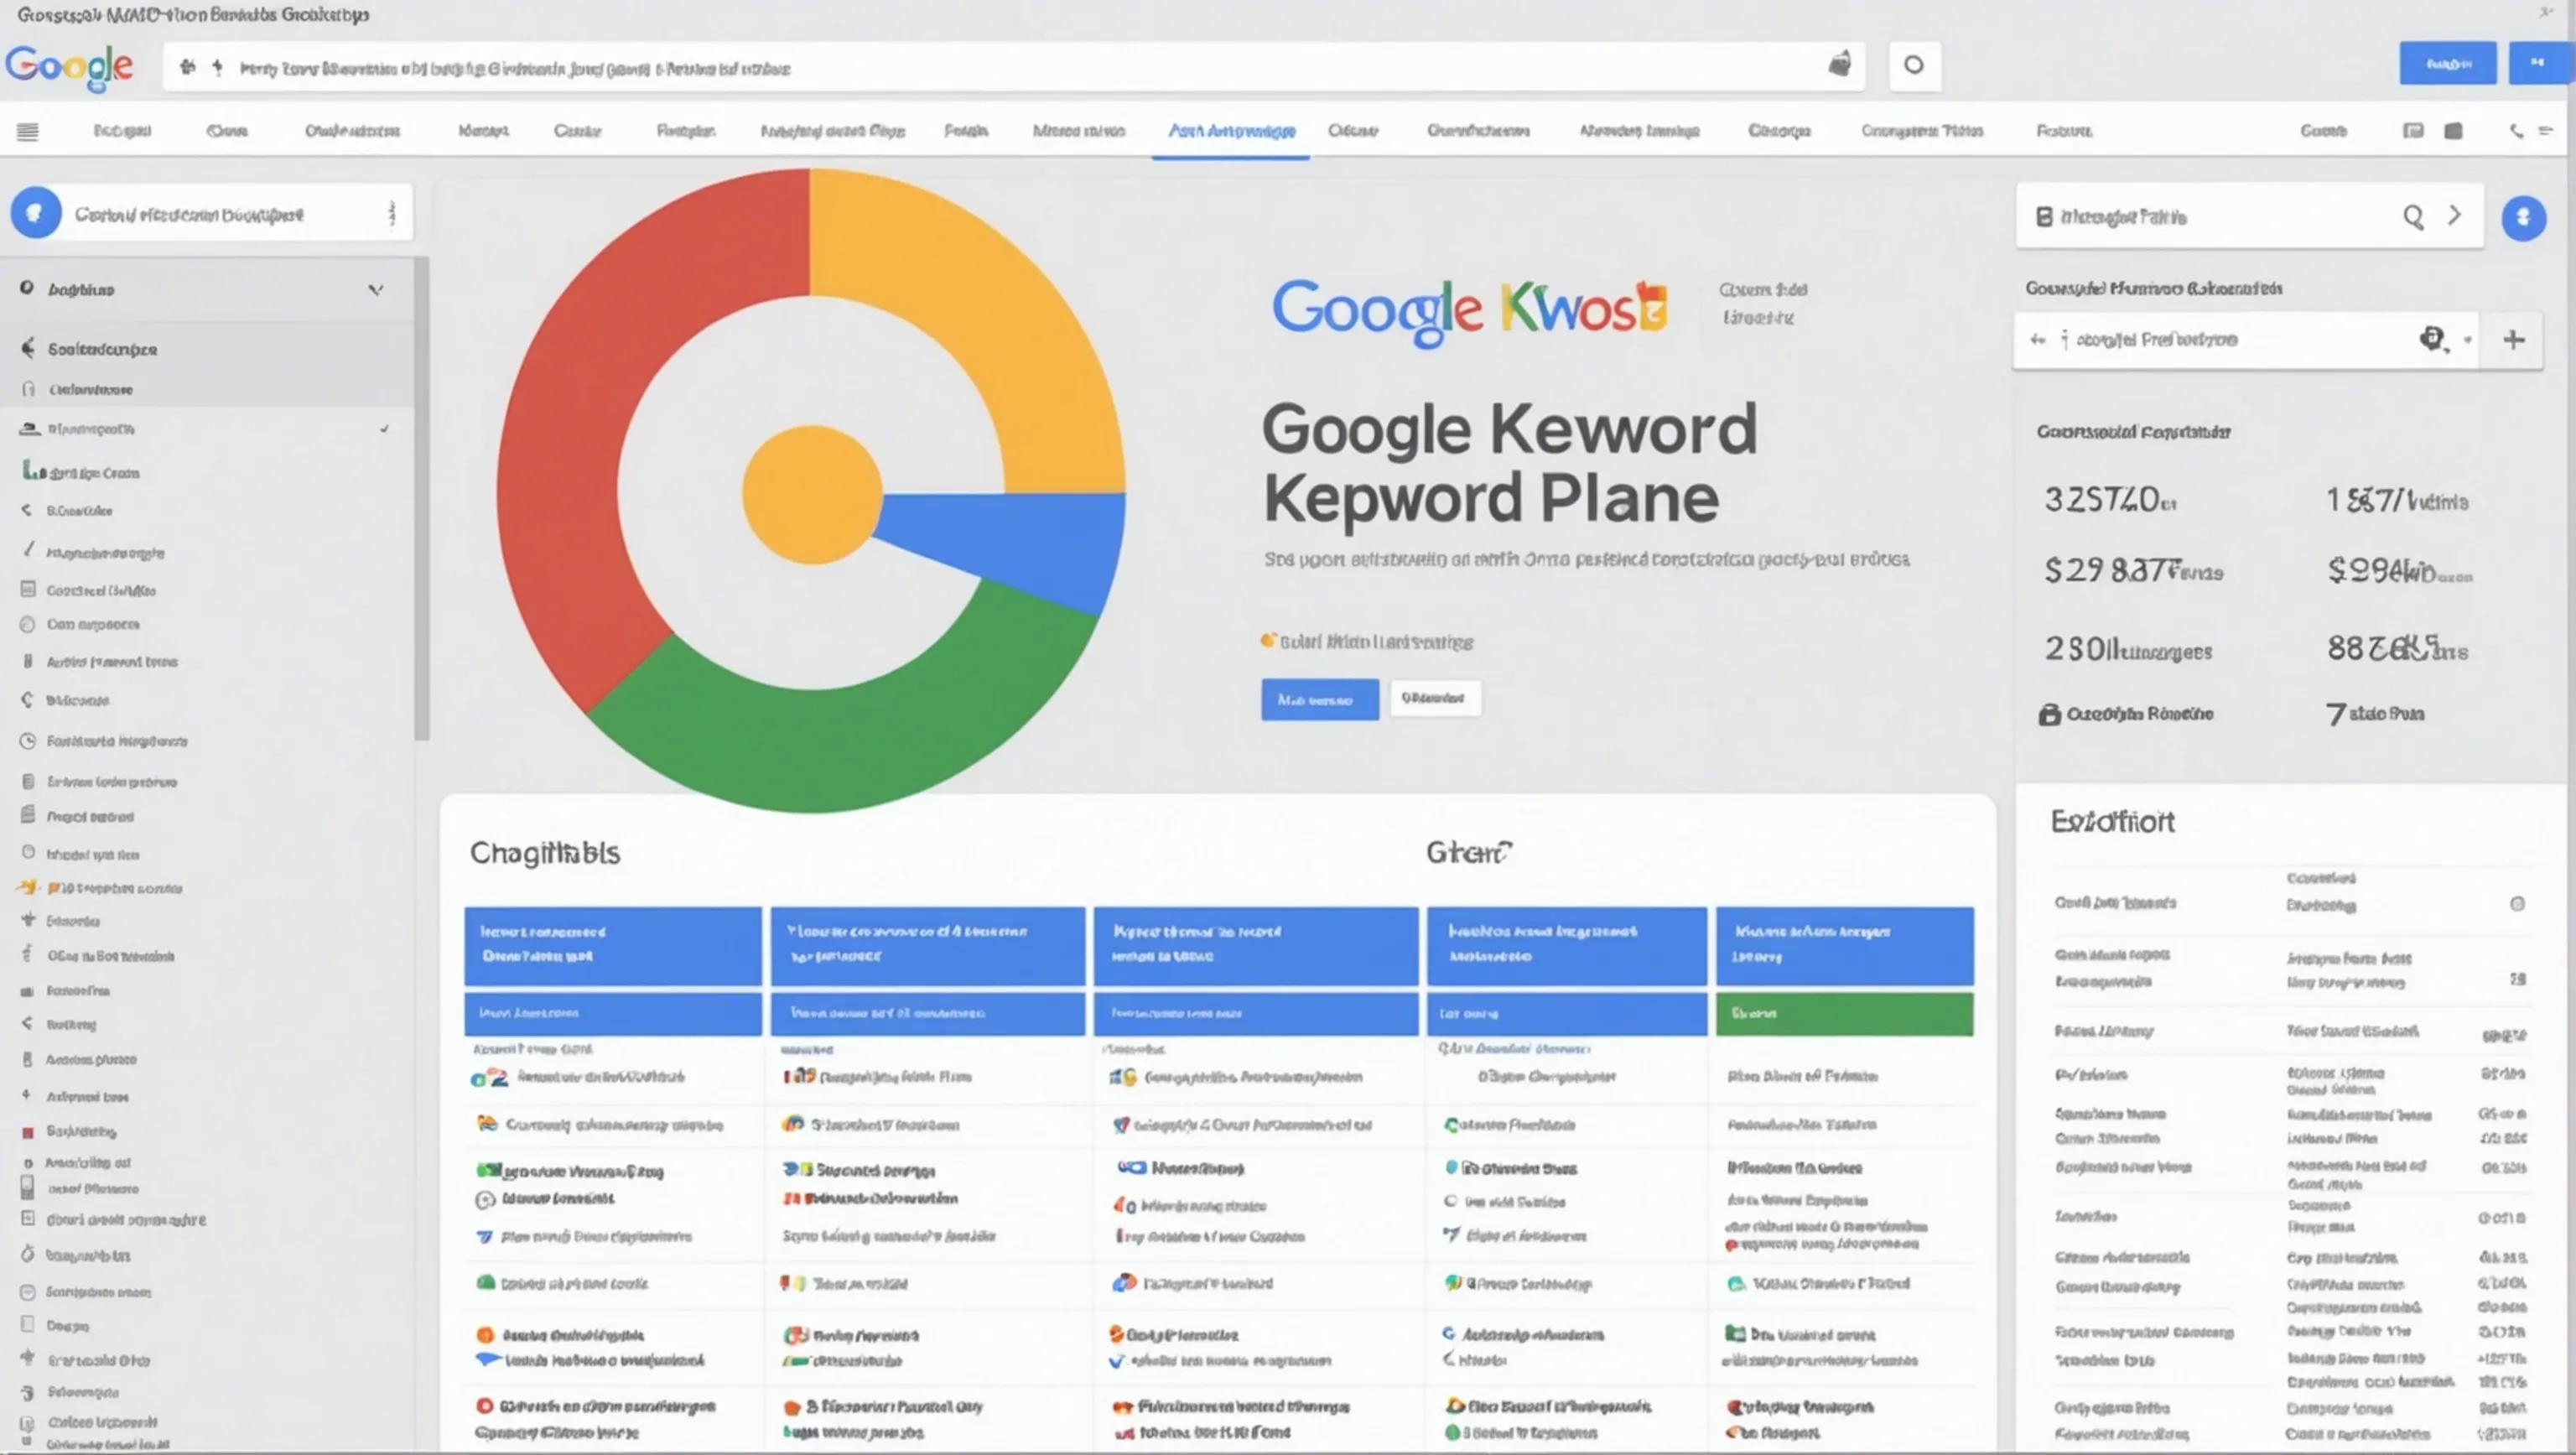 Features and benefits of Google Keyword Planner